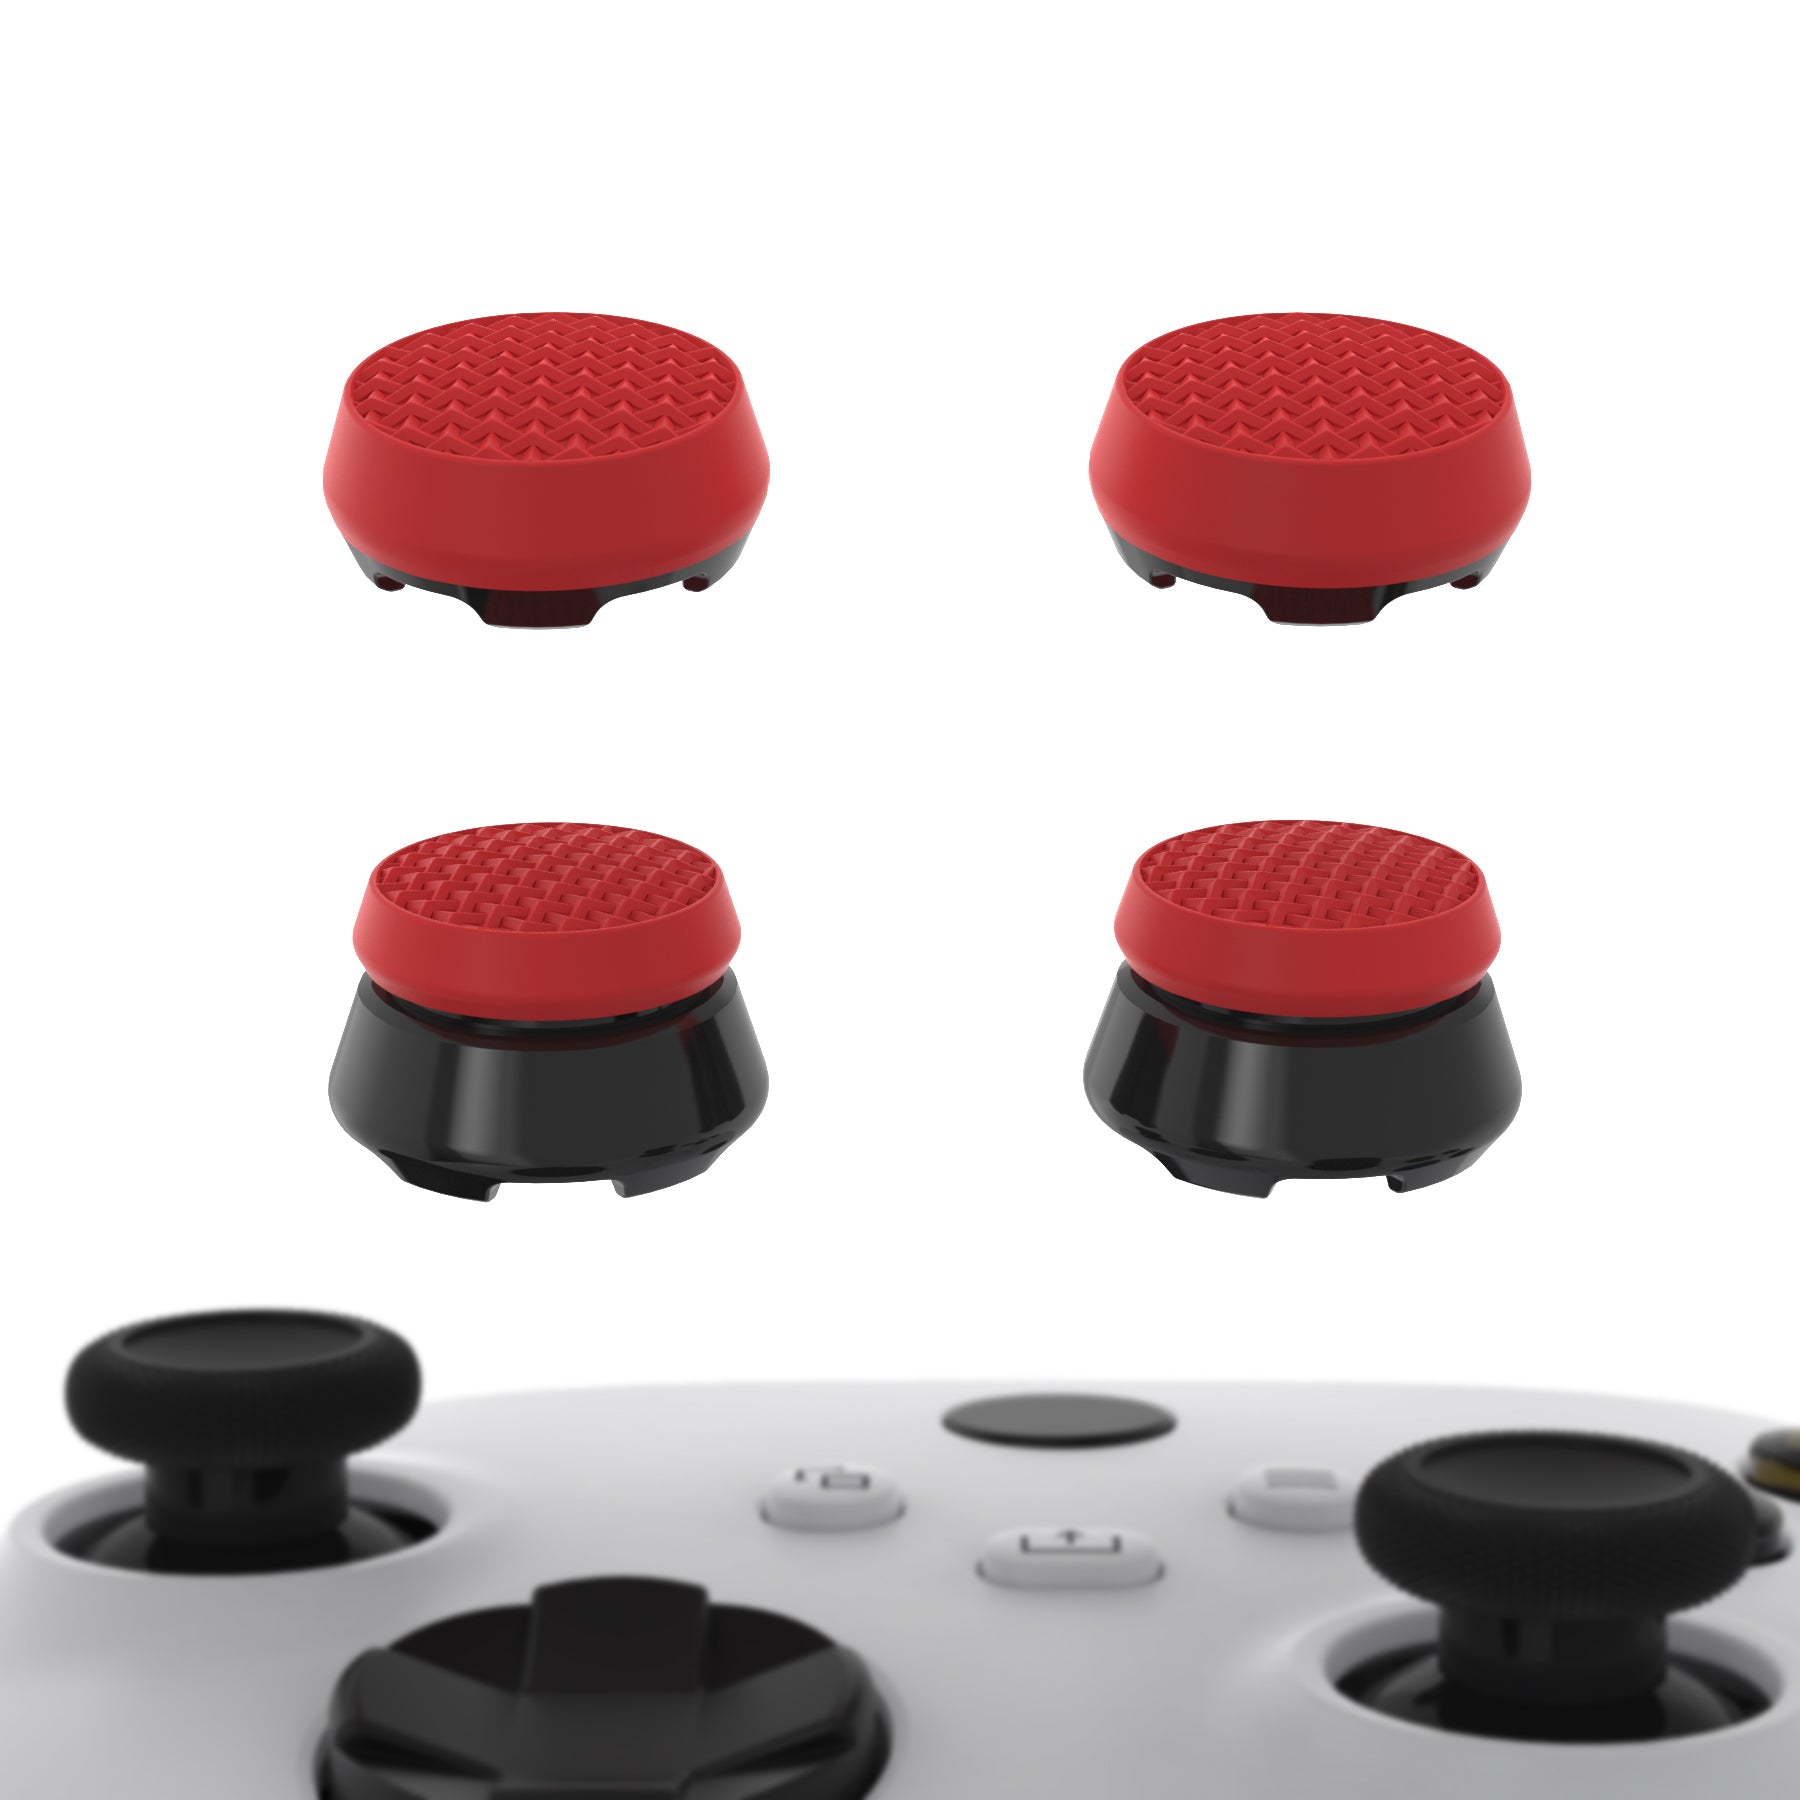 PlayVital Thumbs Pro ARMOR Thumbstick Extender for Xbox Core Controller, for Xbox Series X/S Controller, Joystick Caps Grip for Xbox One Controller - 2 High Raise and 2 Mid Raise Dome - Scarlet Red & Black - PJM5010 PlayVital